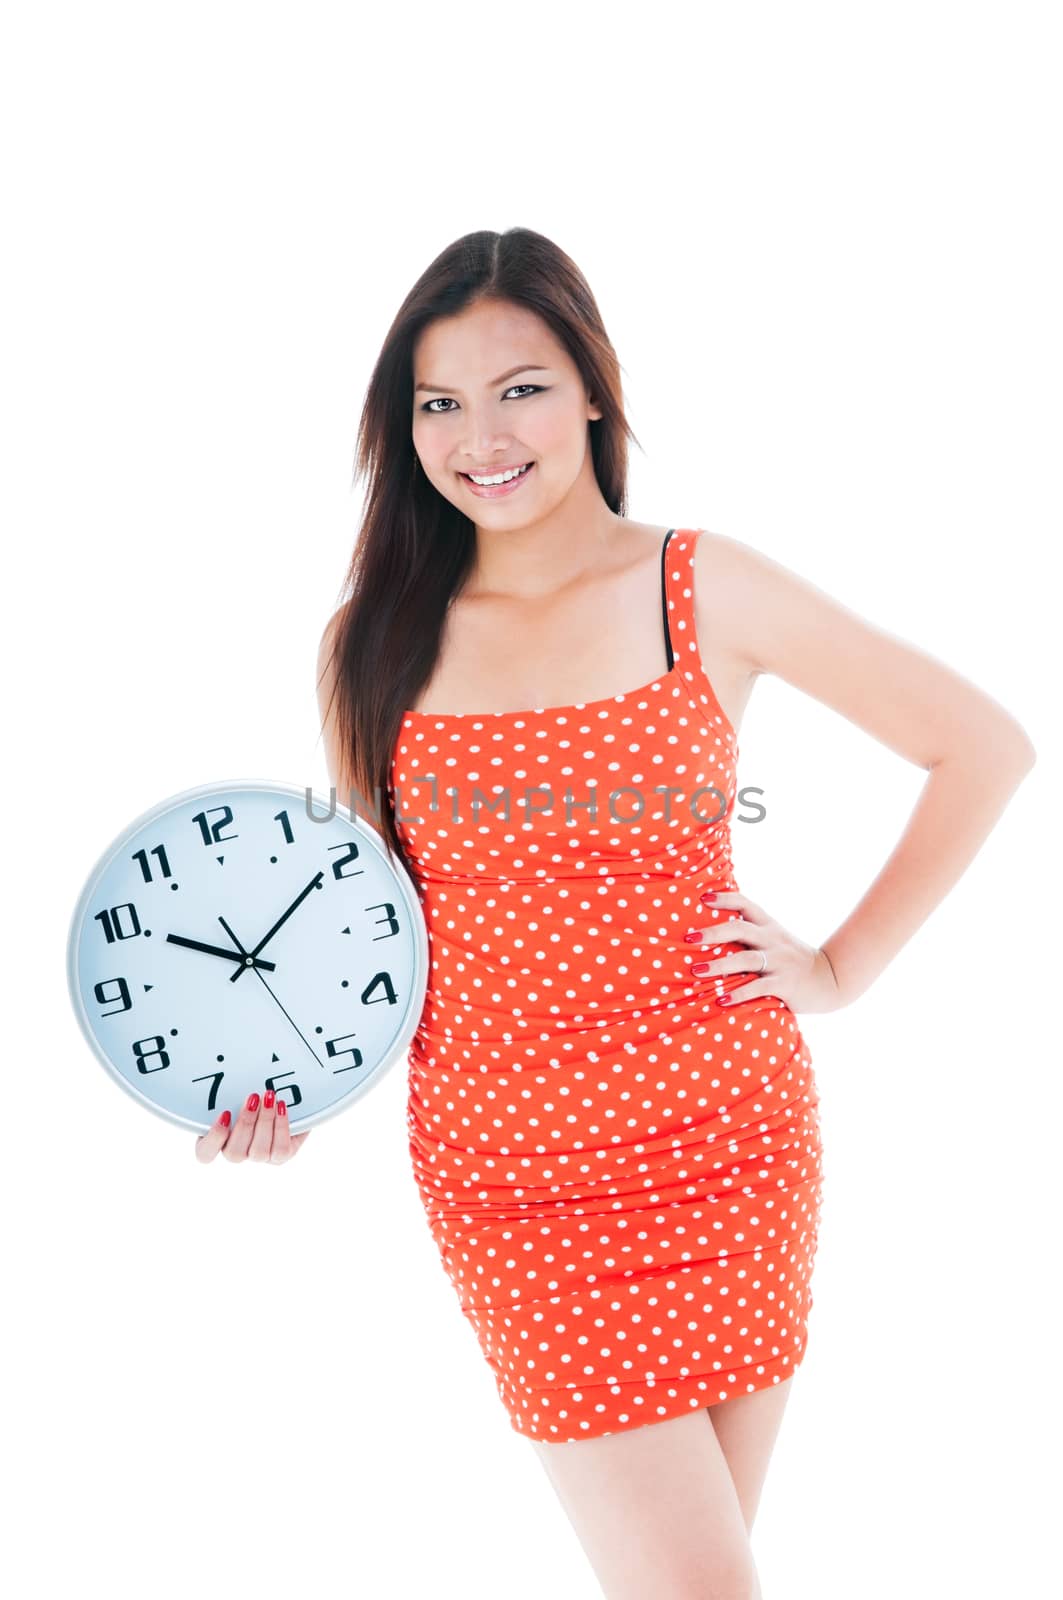 Portrait of an attractive young woman holding a clock over white background